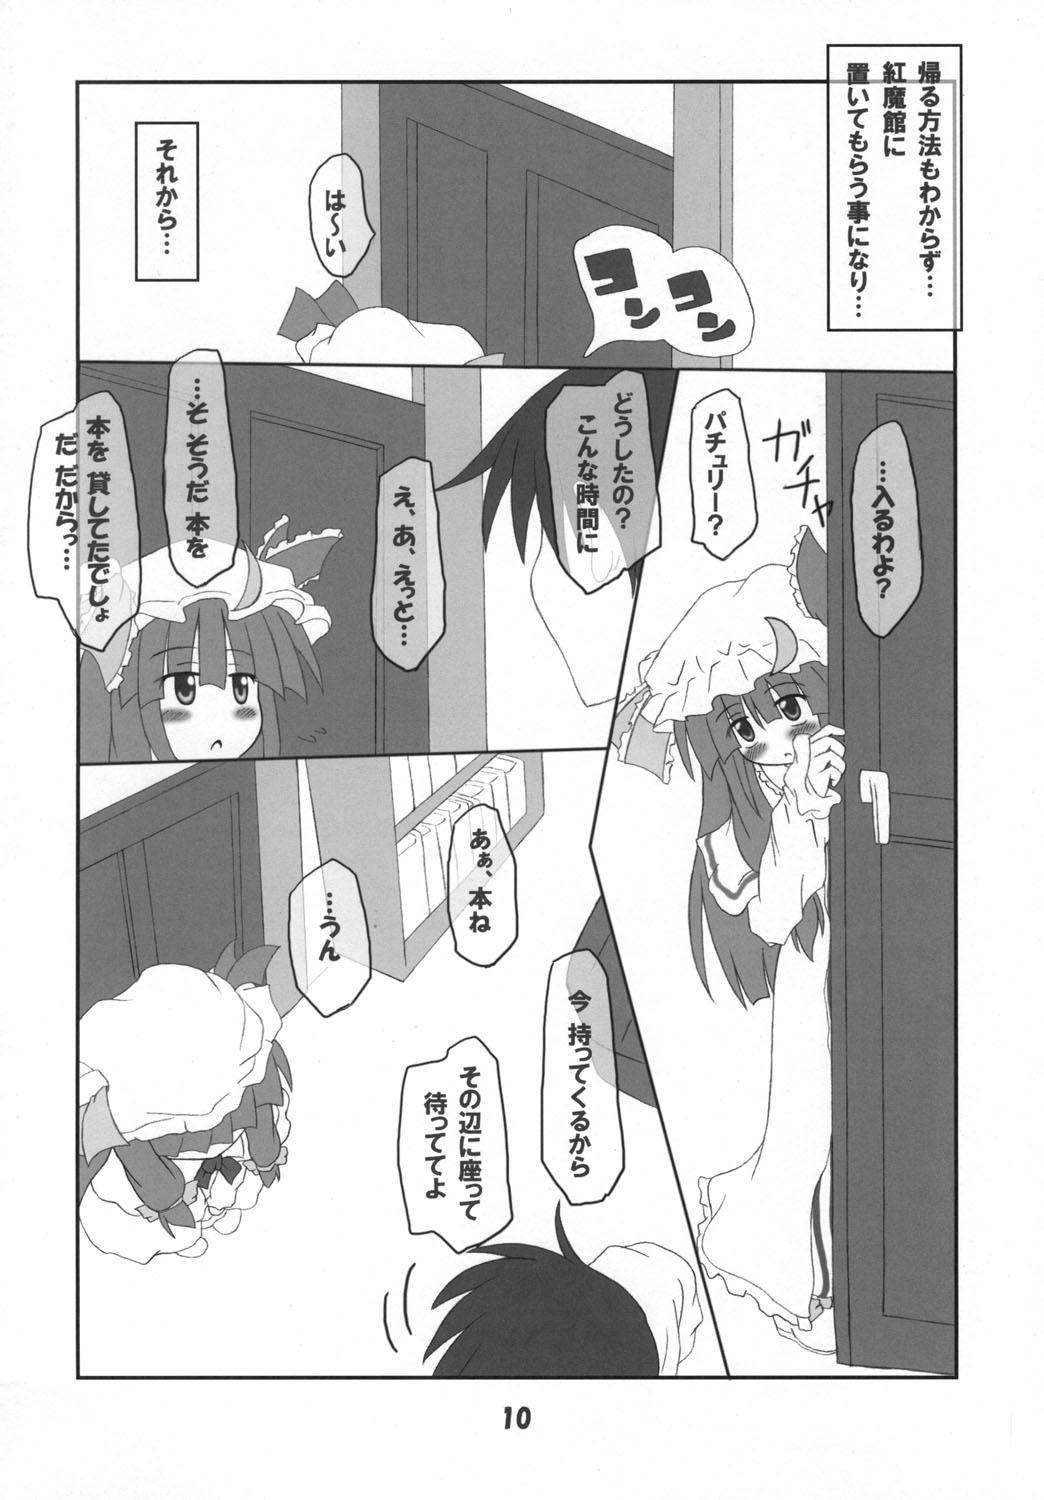 Bribe Rollin 18 - Touhou project Raw - Page 9